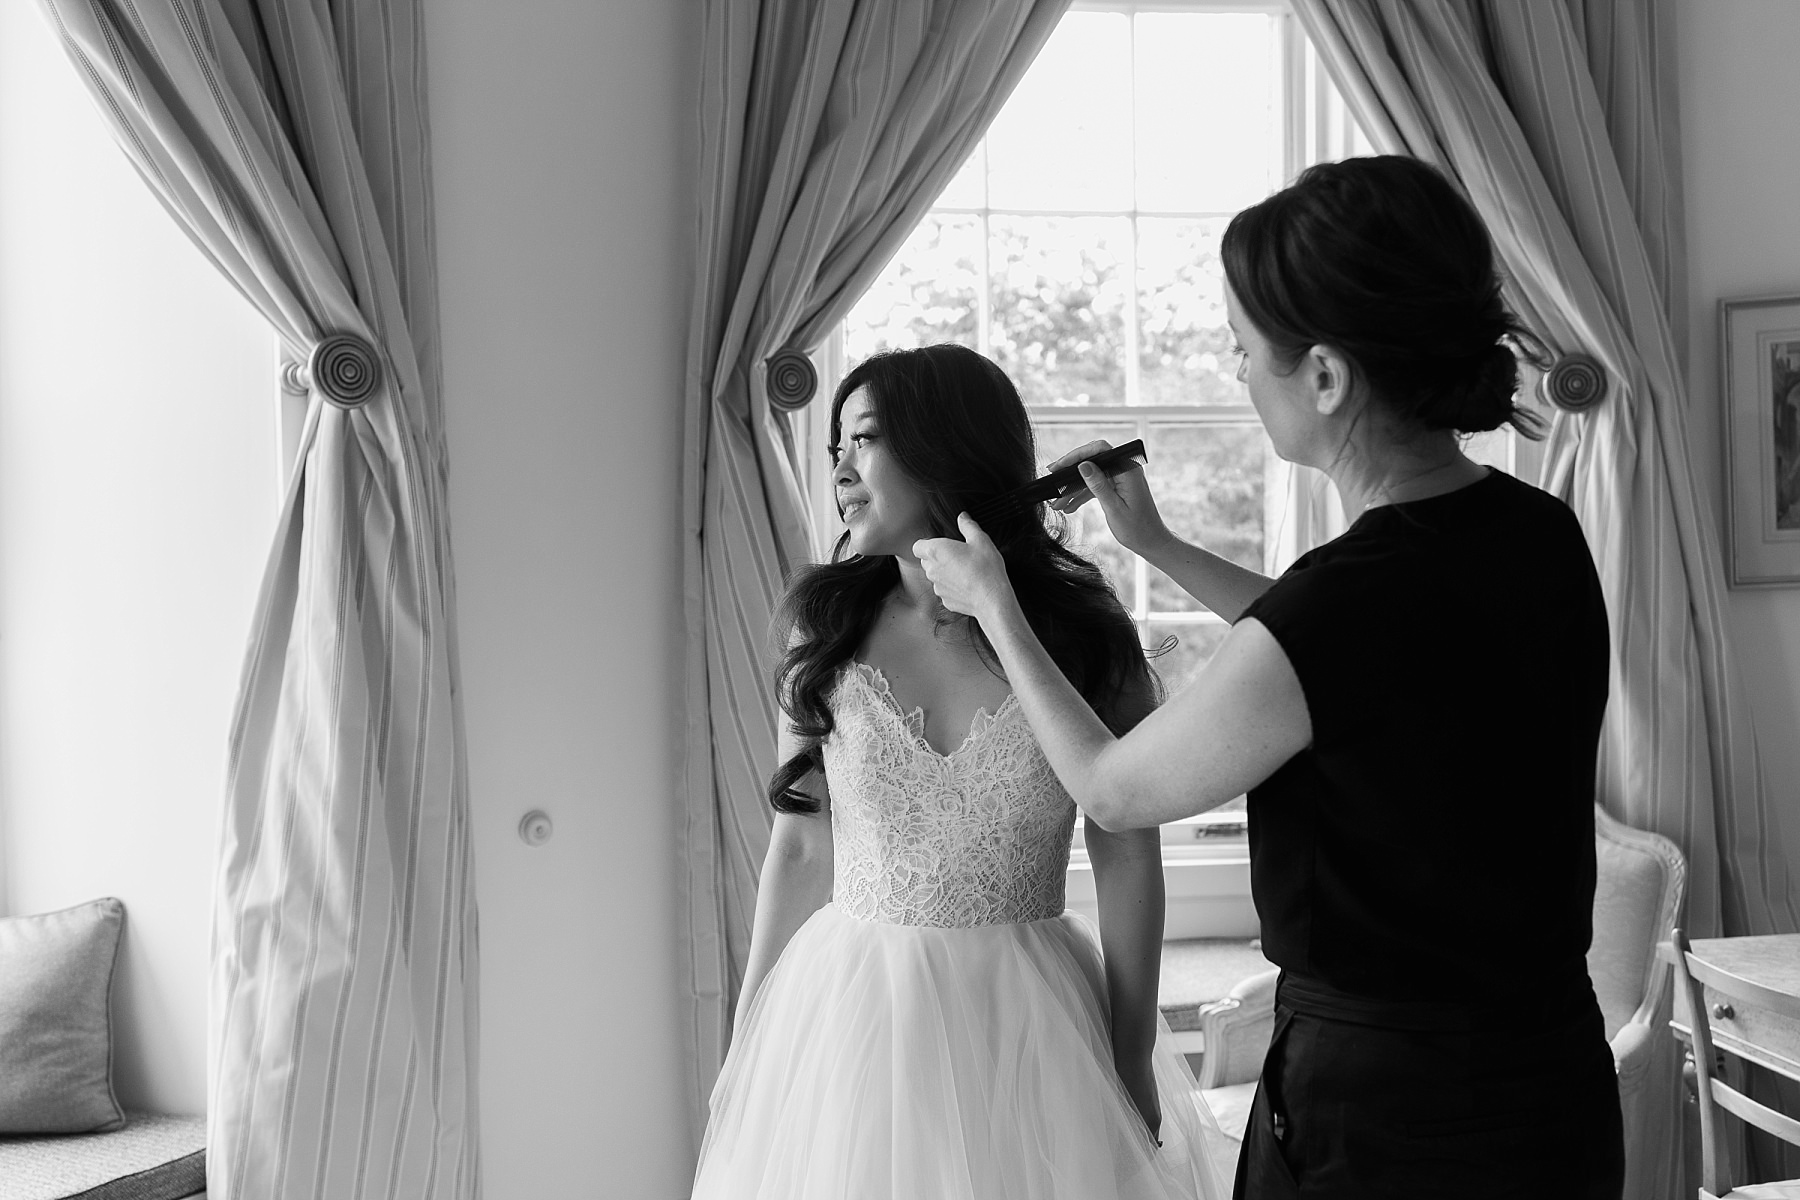 american bride getting into hayley paige wedding dress at cluny castle wedding scotland with jodie gibb makeup artists